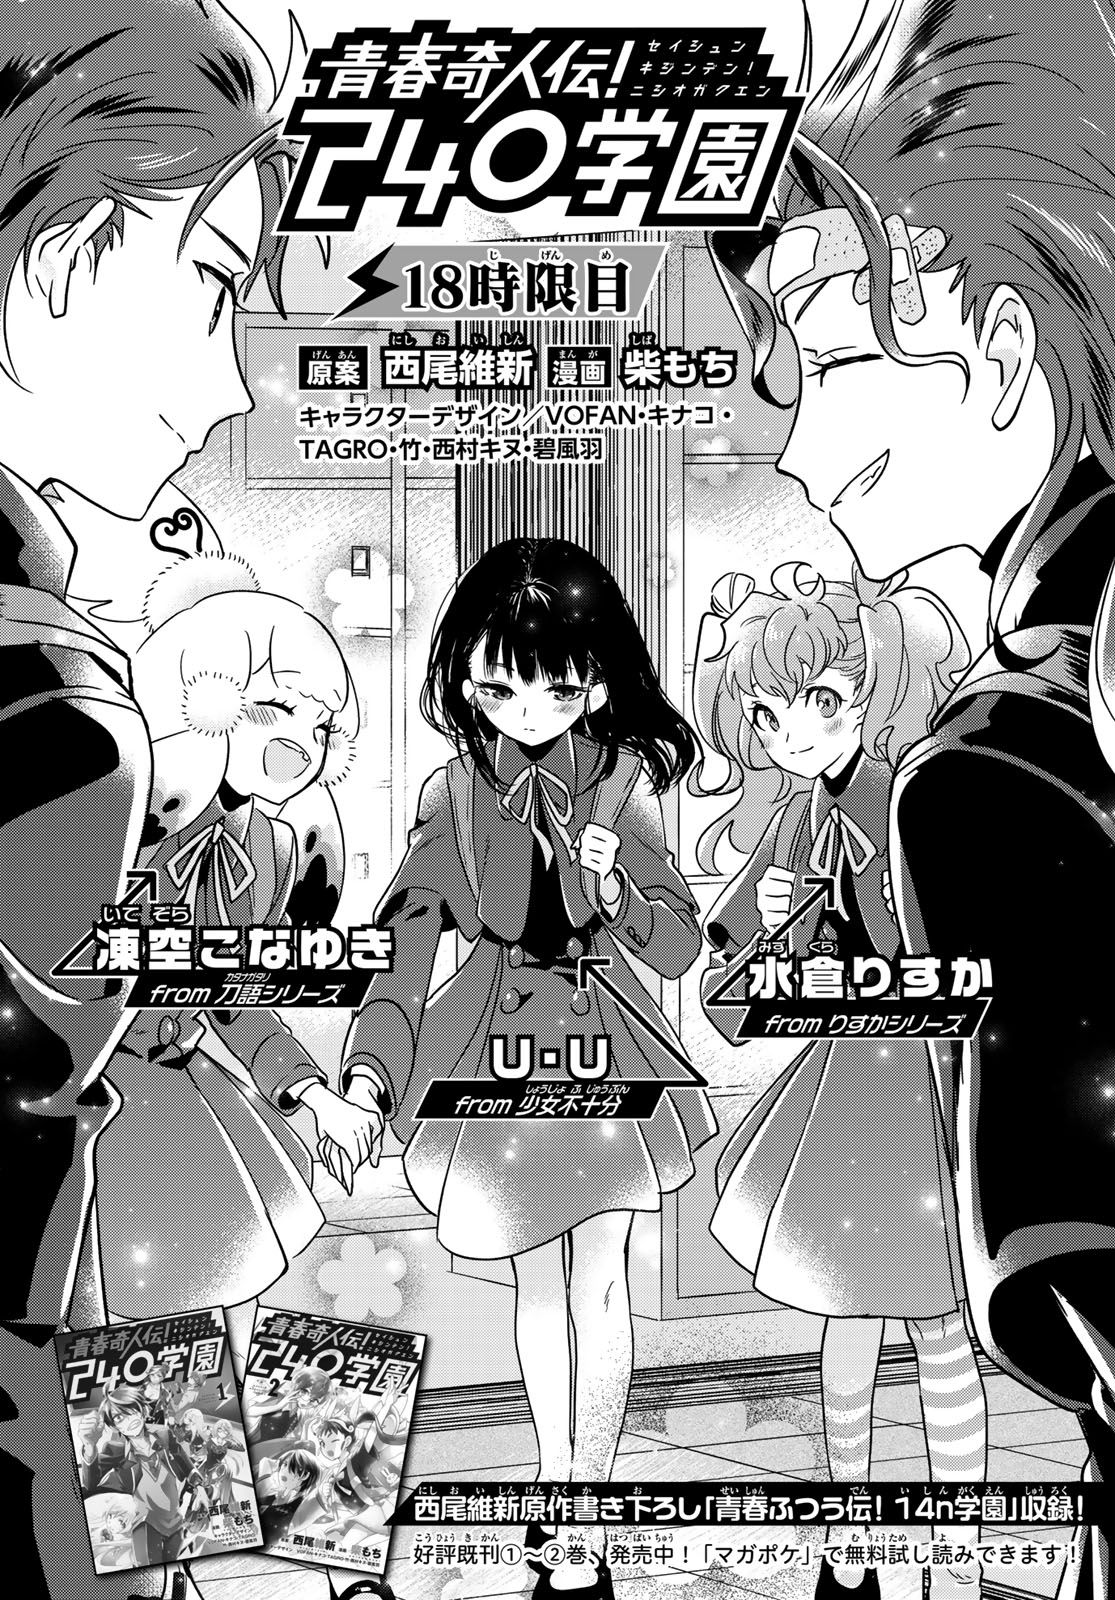 Legend Of Eccentric Youth 240 Academy Chapter 18 Nisioisin Wiki Fandom